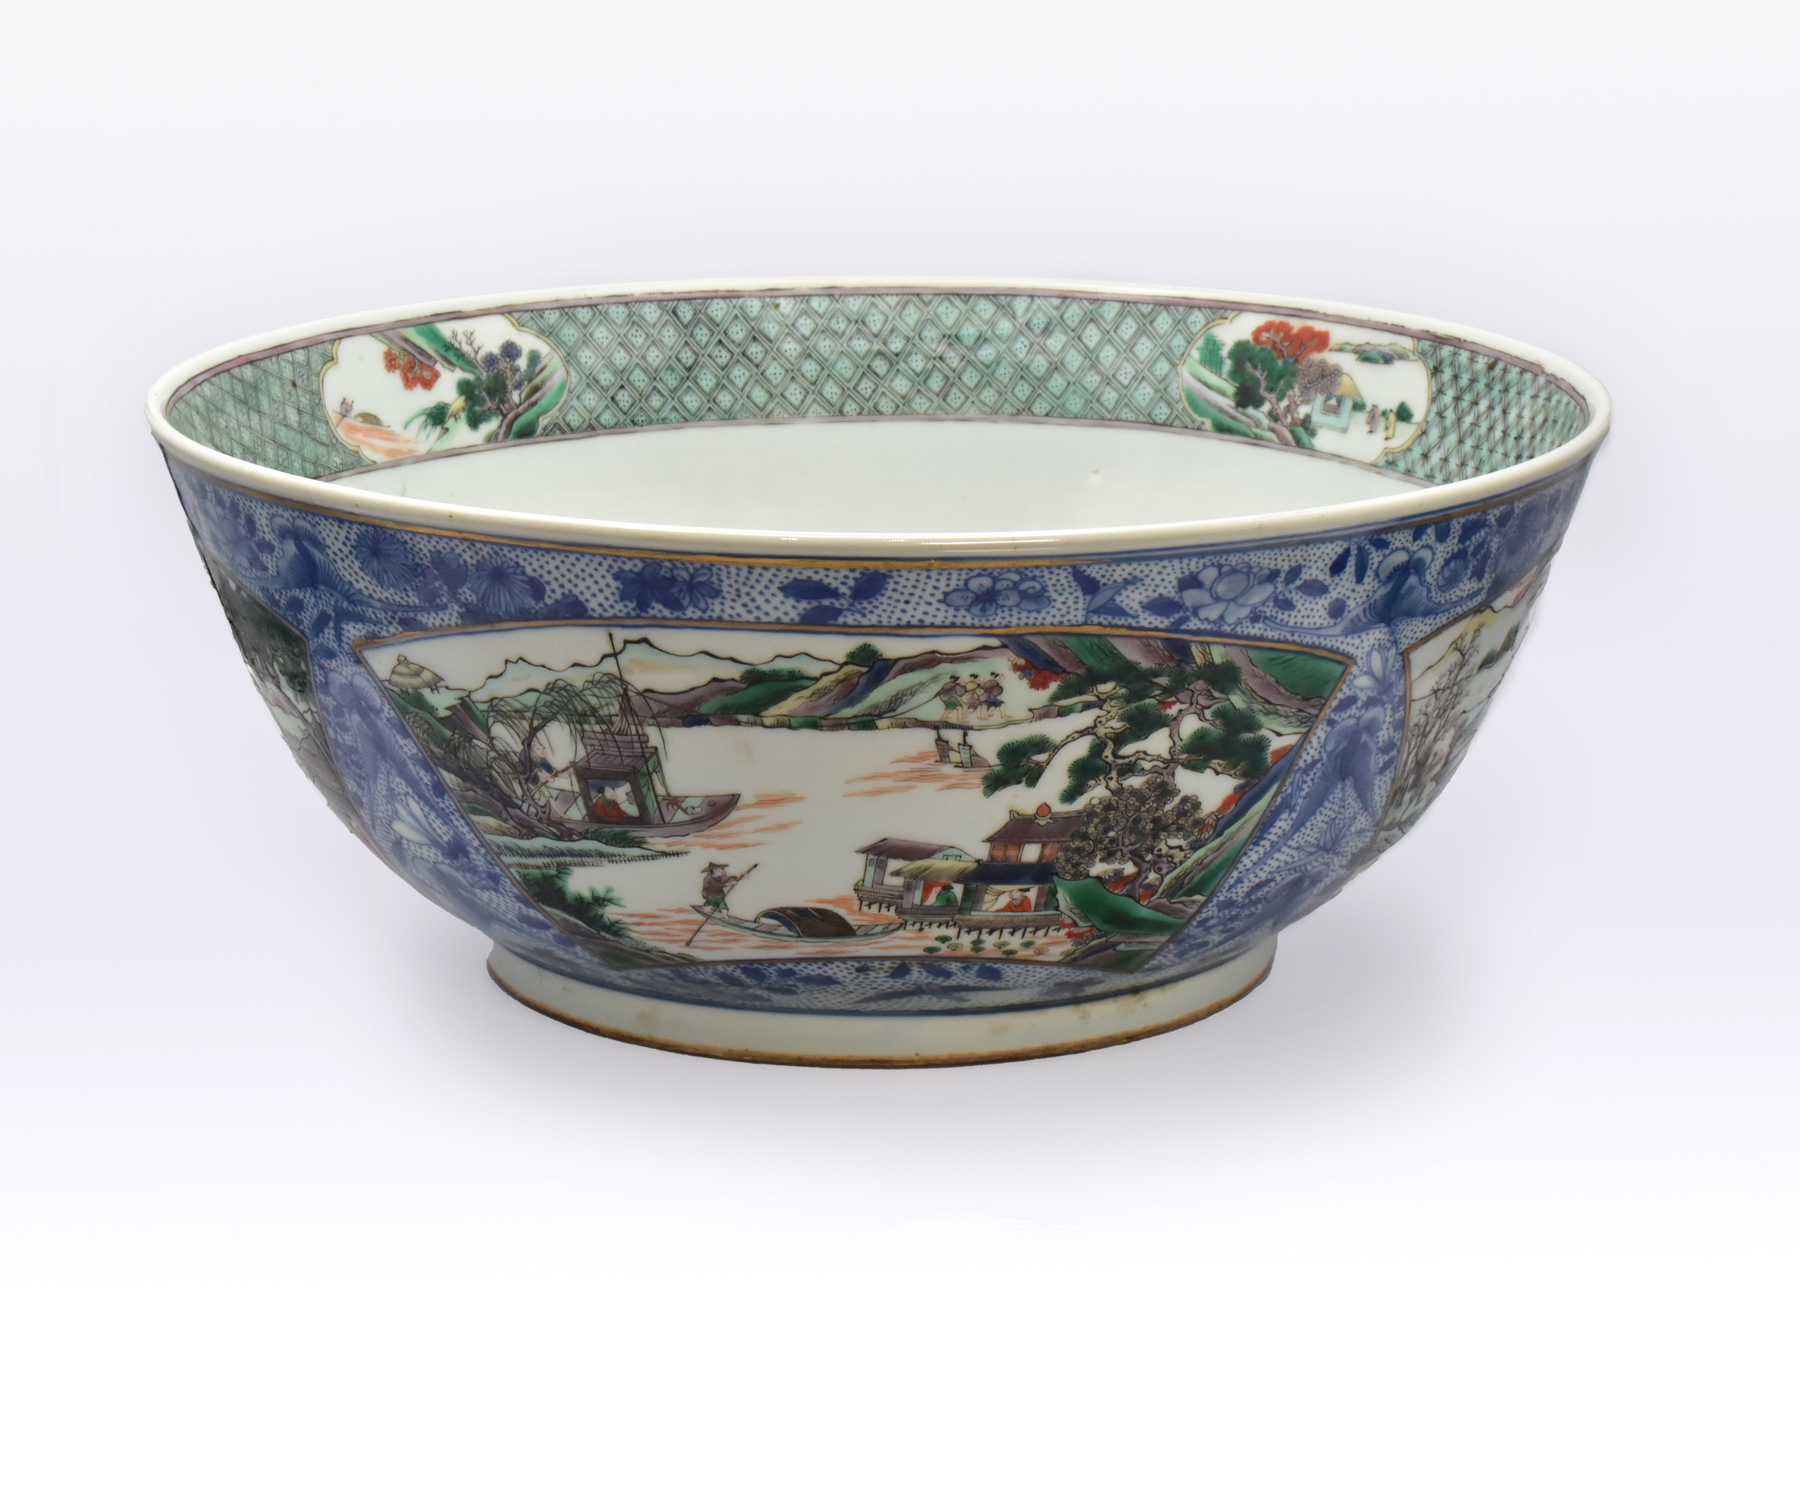 A LARGE CHINESE UNDERGLAZE-BLUE AND 'FAMILLE-VERTE' PUNCHBOWL, QING DYNASTY, 19TH CENTURY